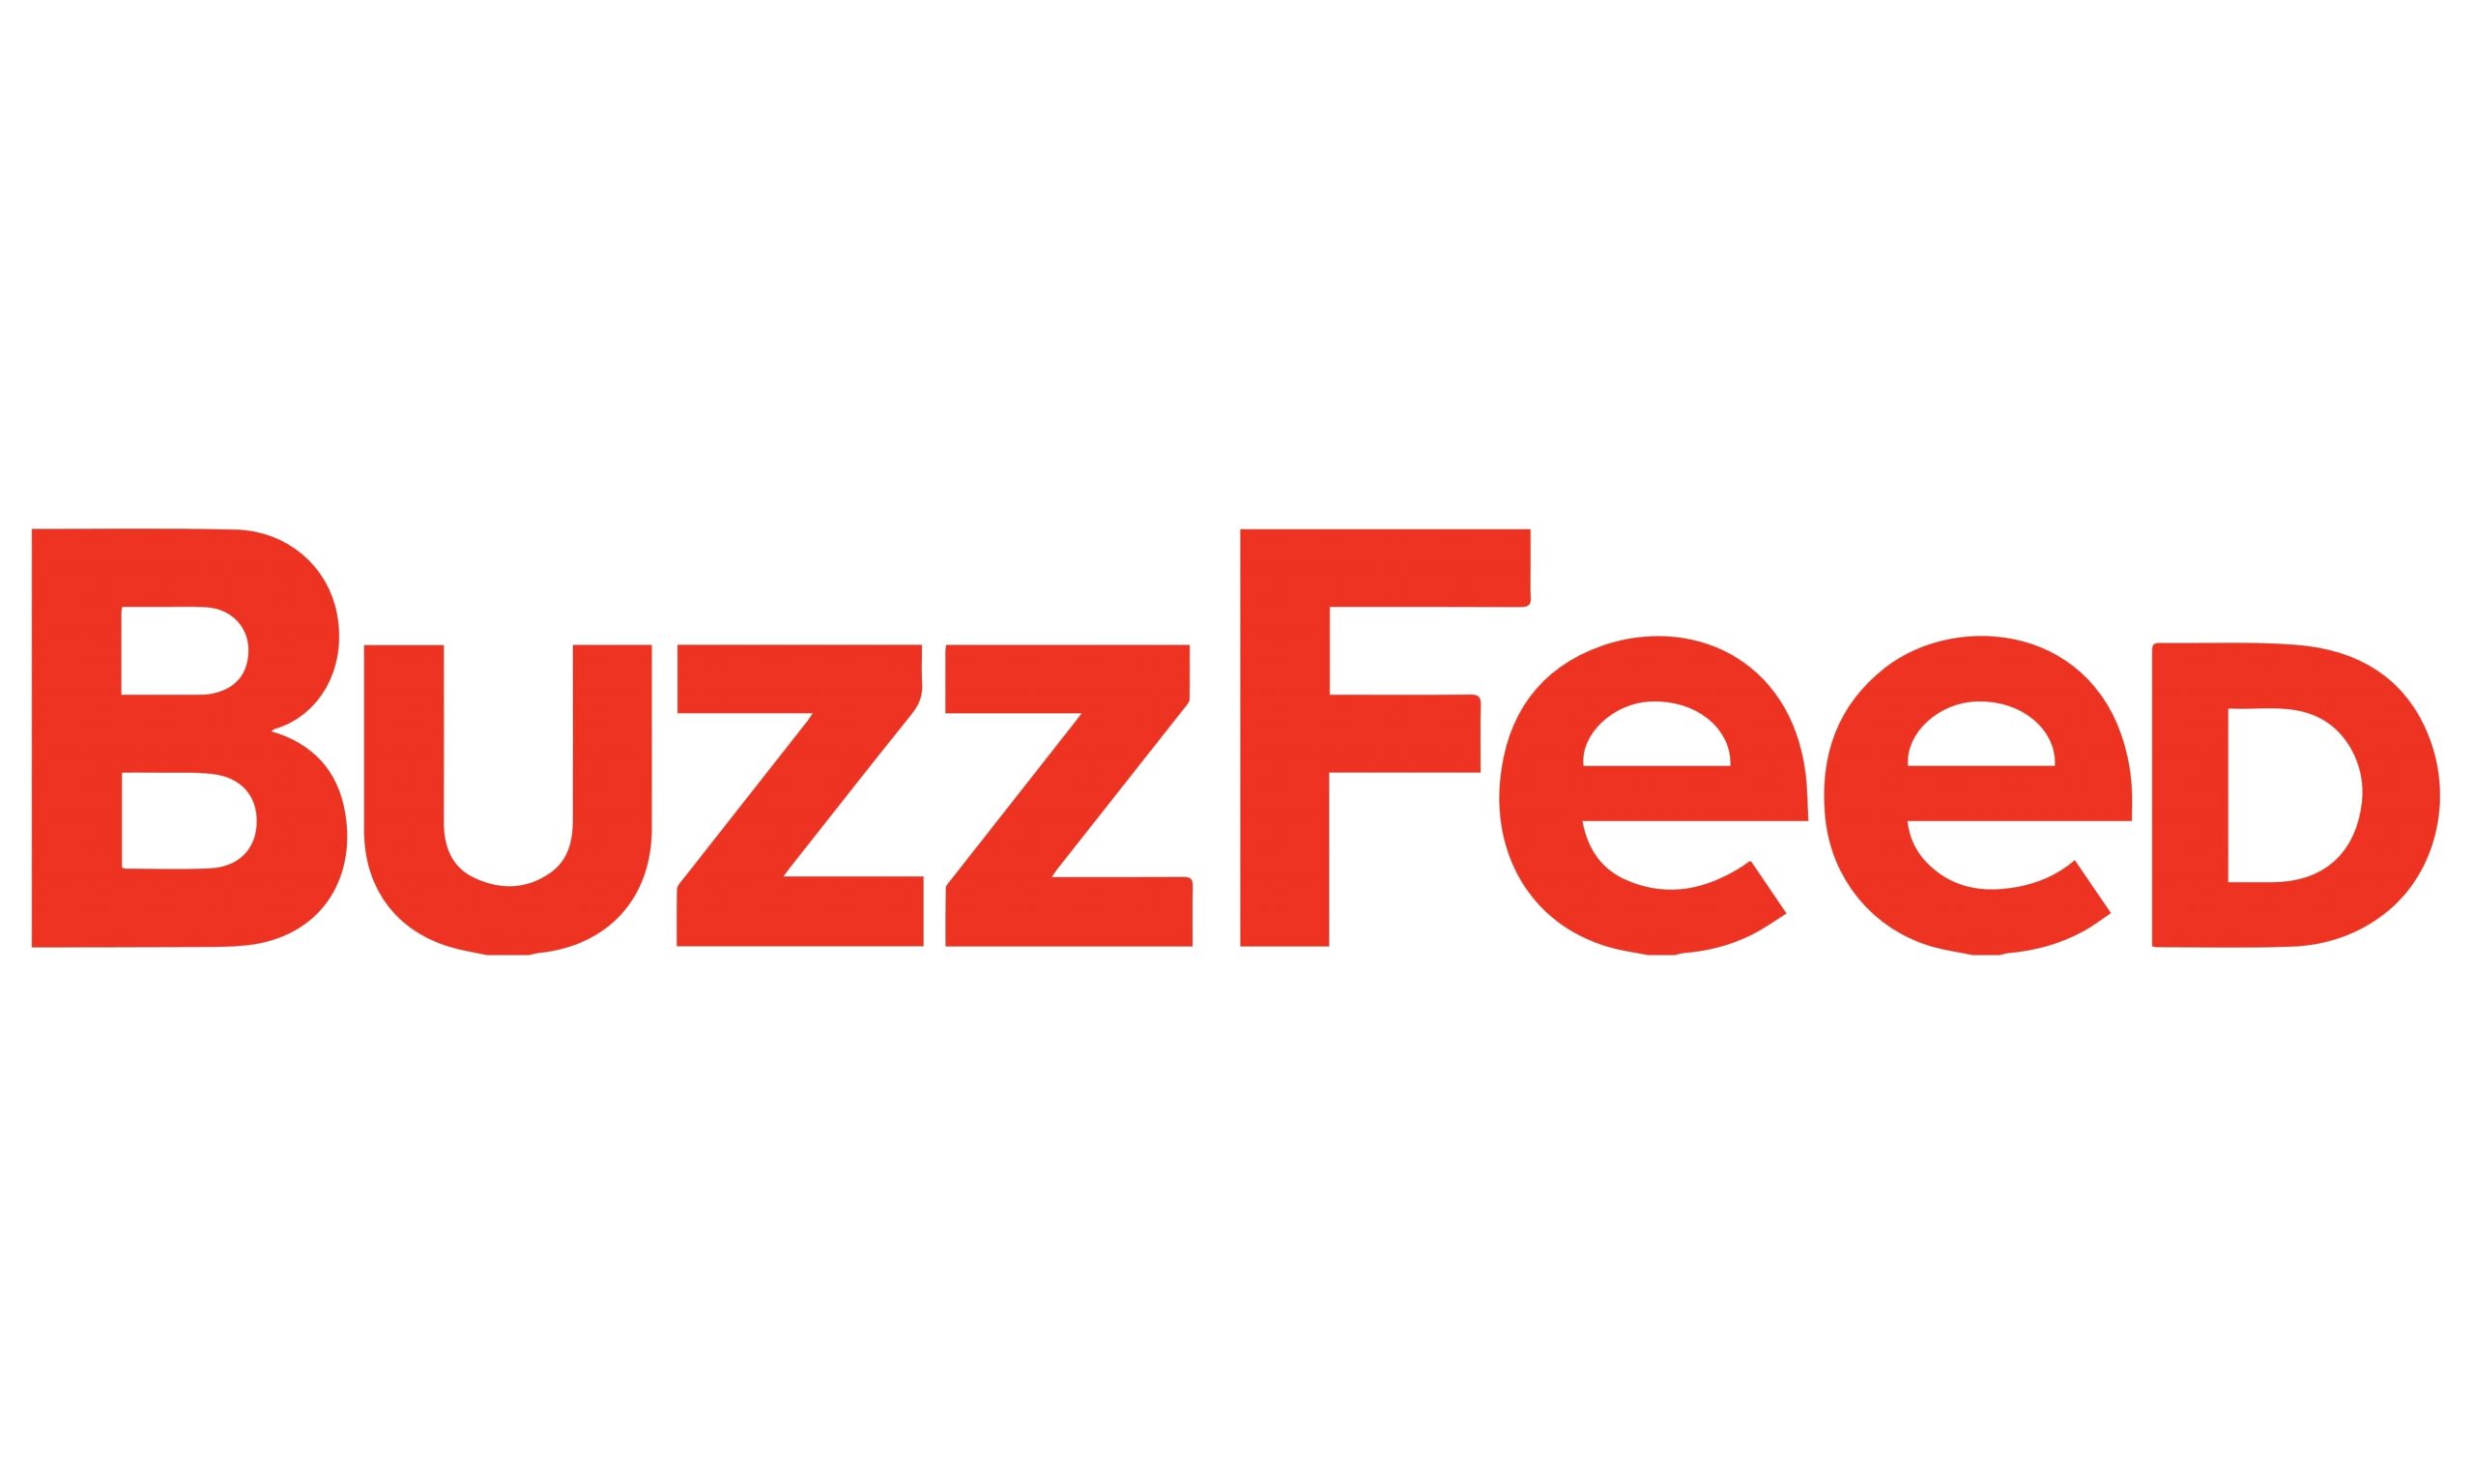 How to delete a BuzzFeed Account?